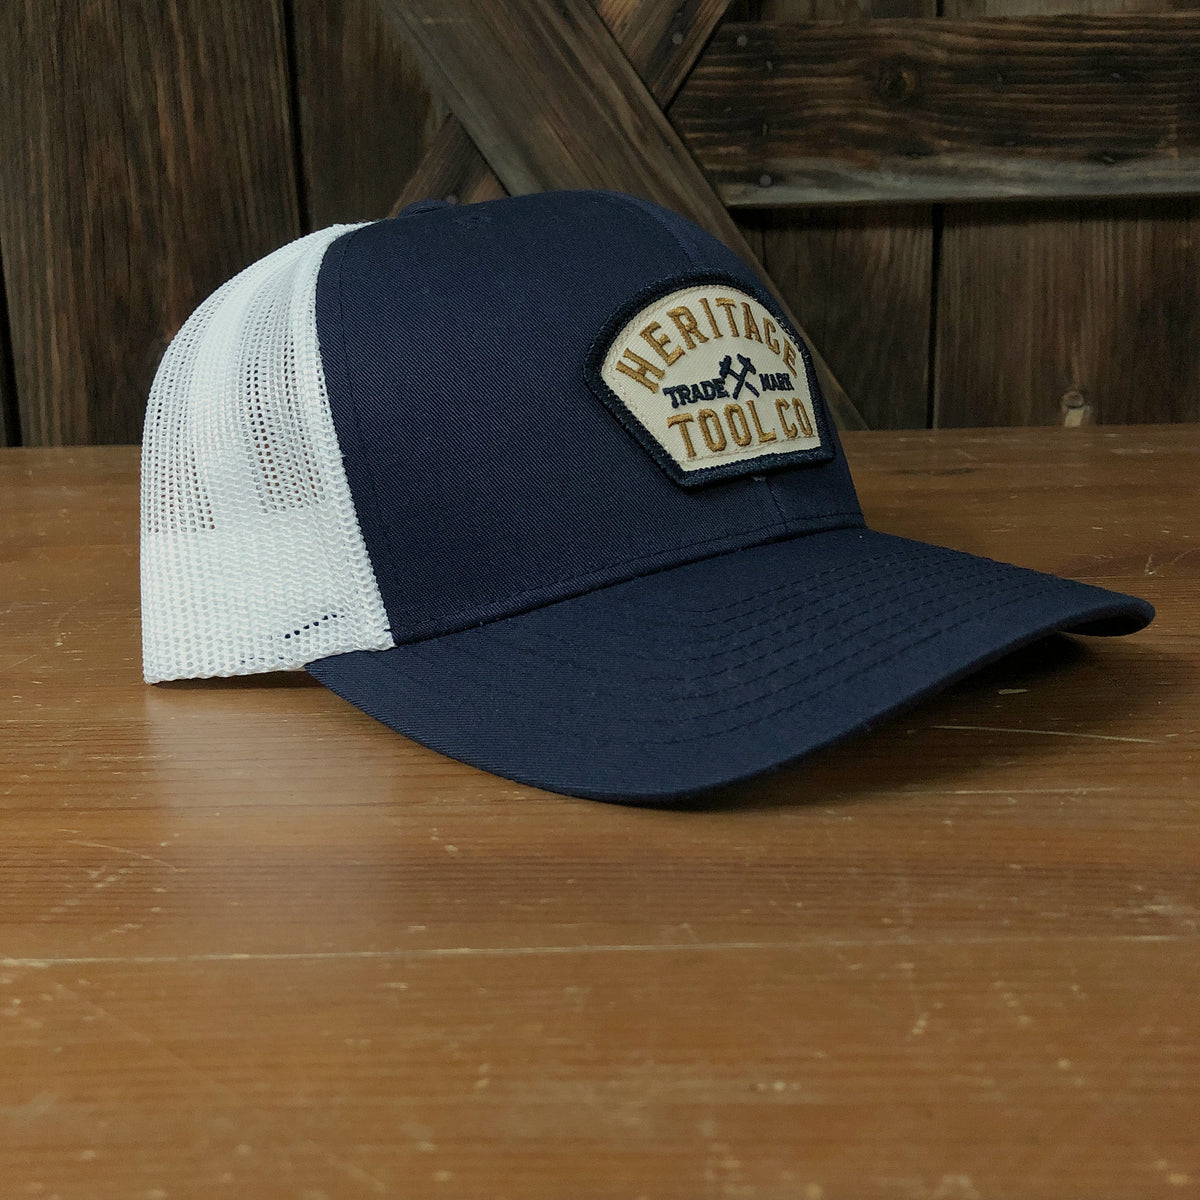 Heritage Tool Co. Patch Hat - Blue